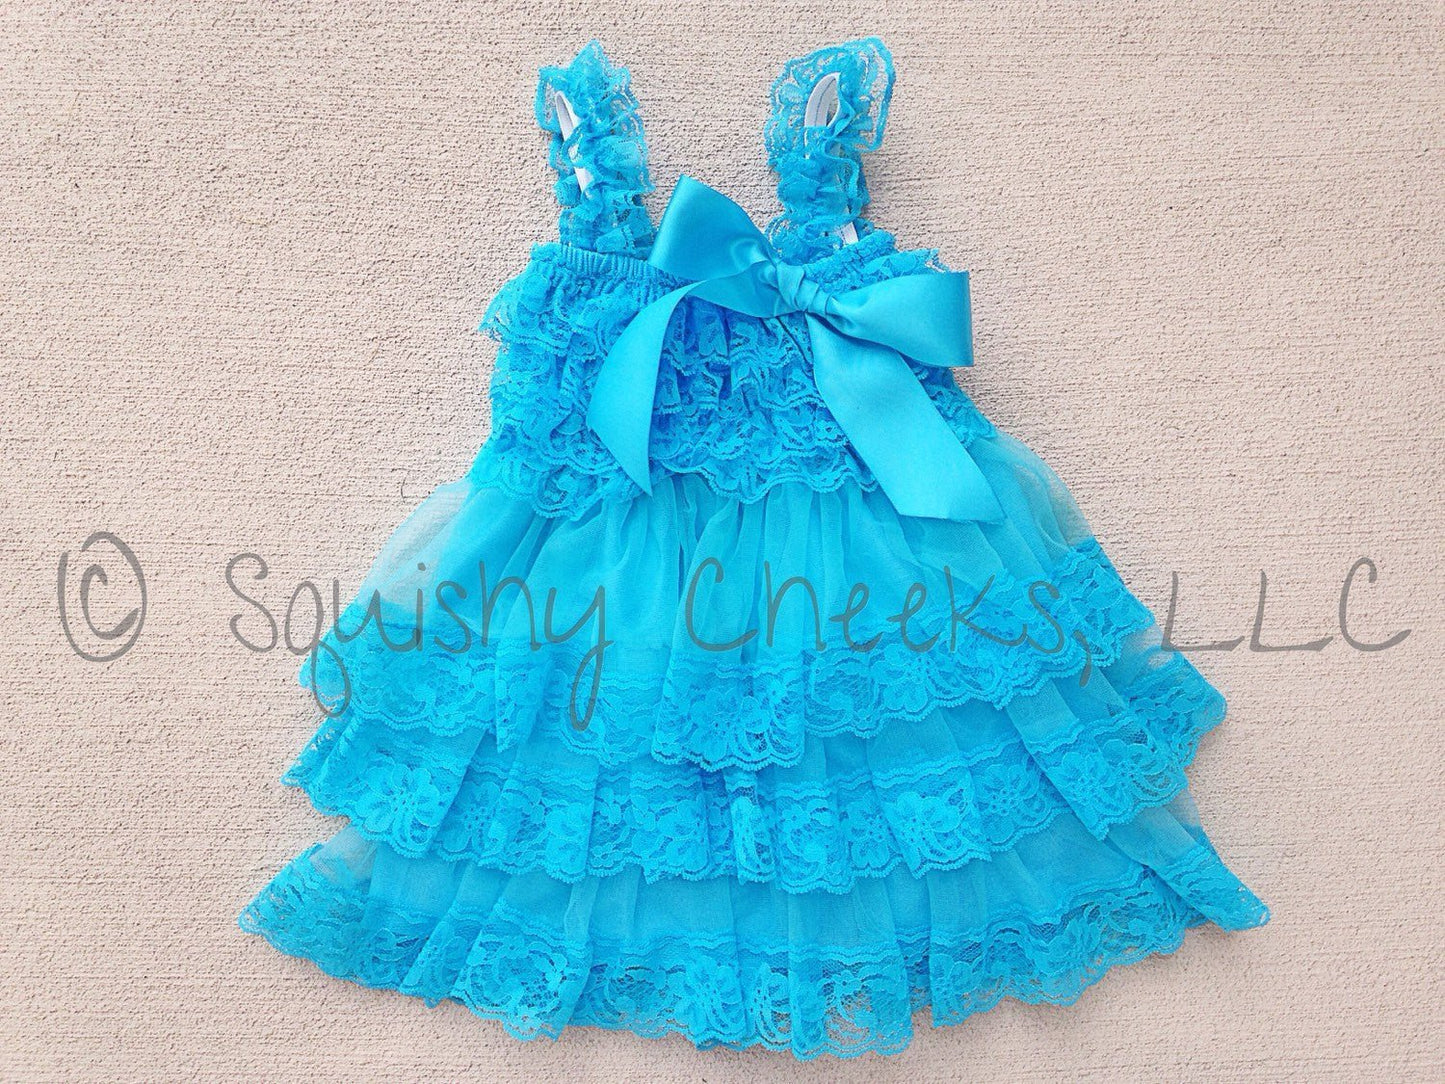 SALE Bright Turquoise Ruffled Lace Dress - Squishy Cheeks